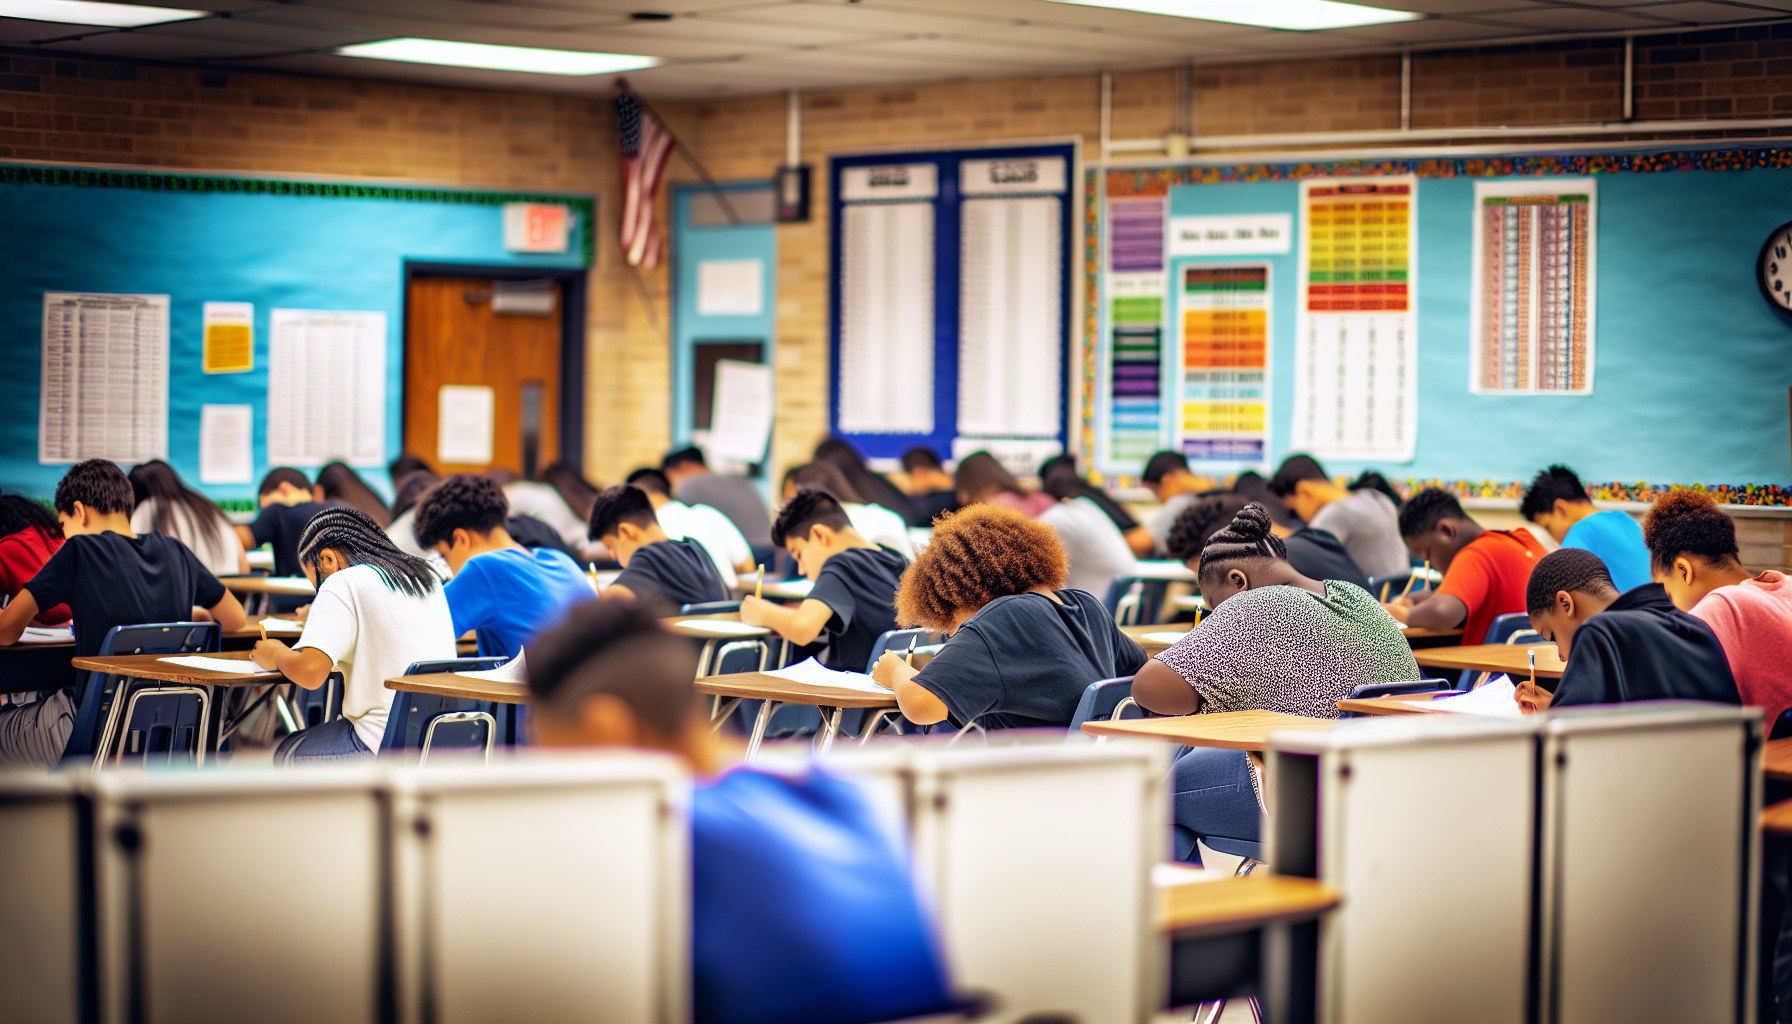 Students taking state assessment tests in a school setting